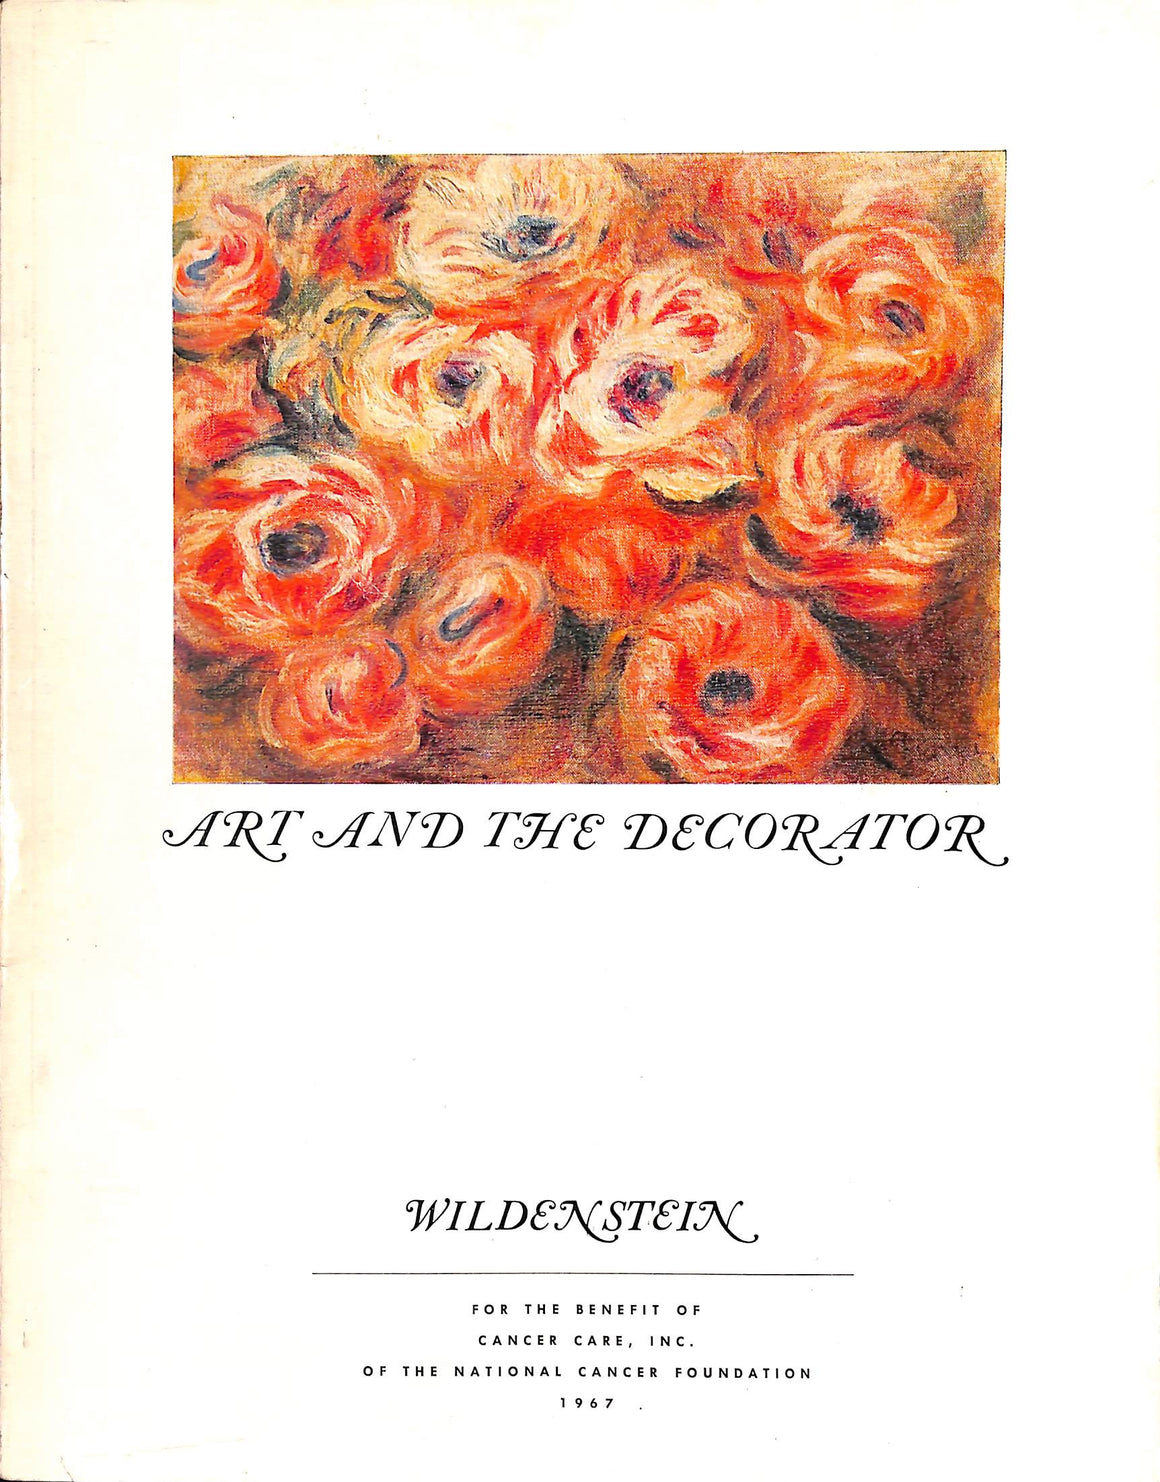 "Art And The Decorator" 1967